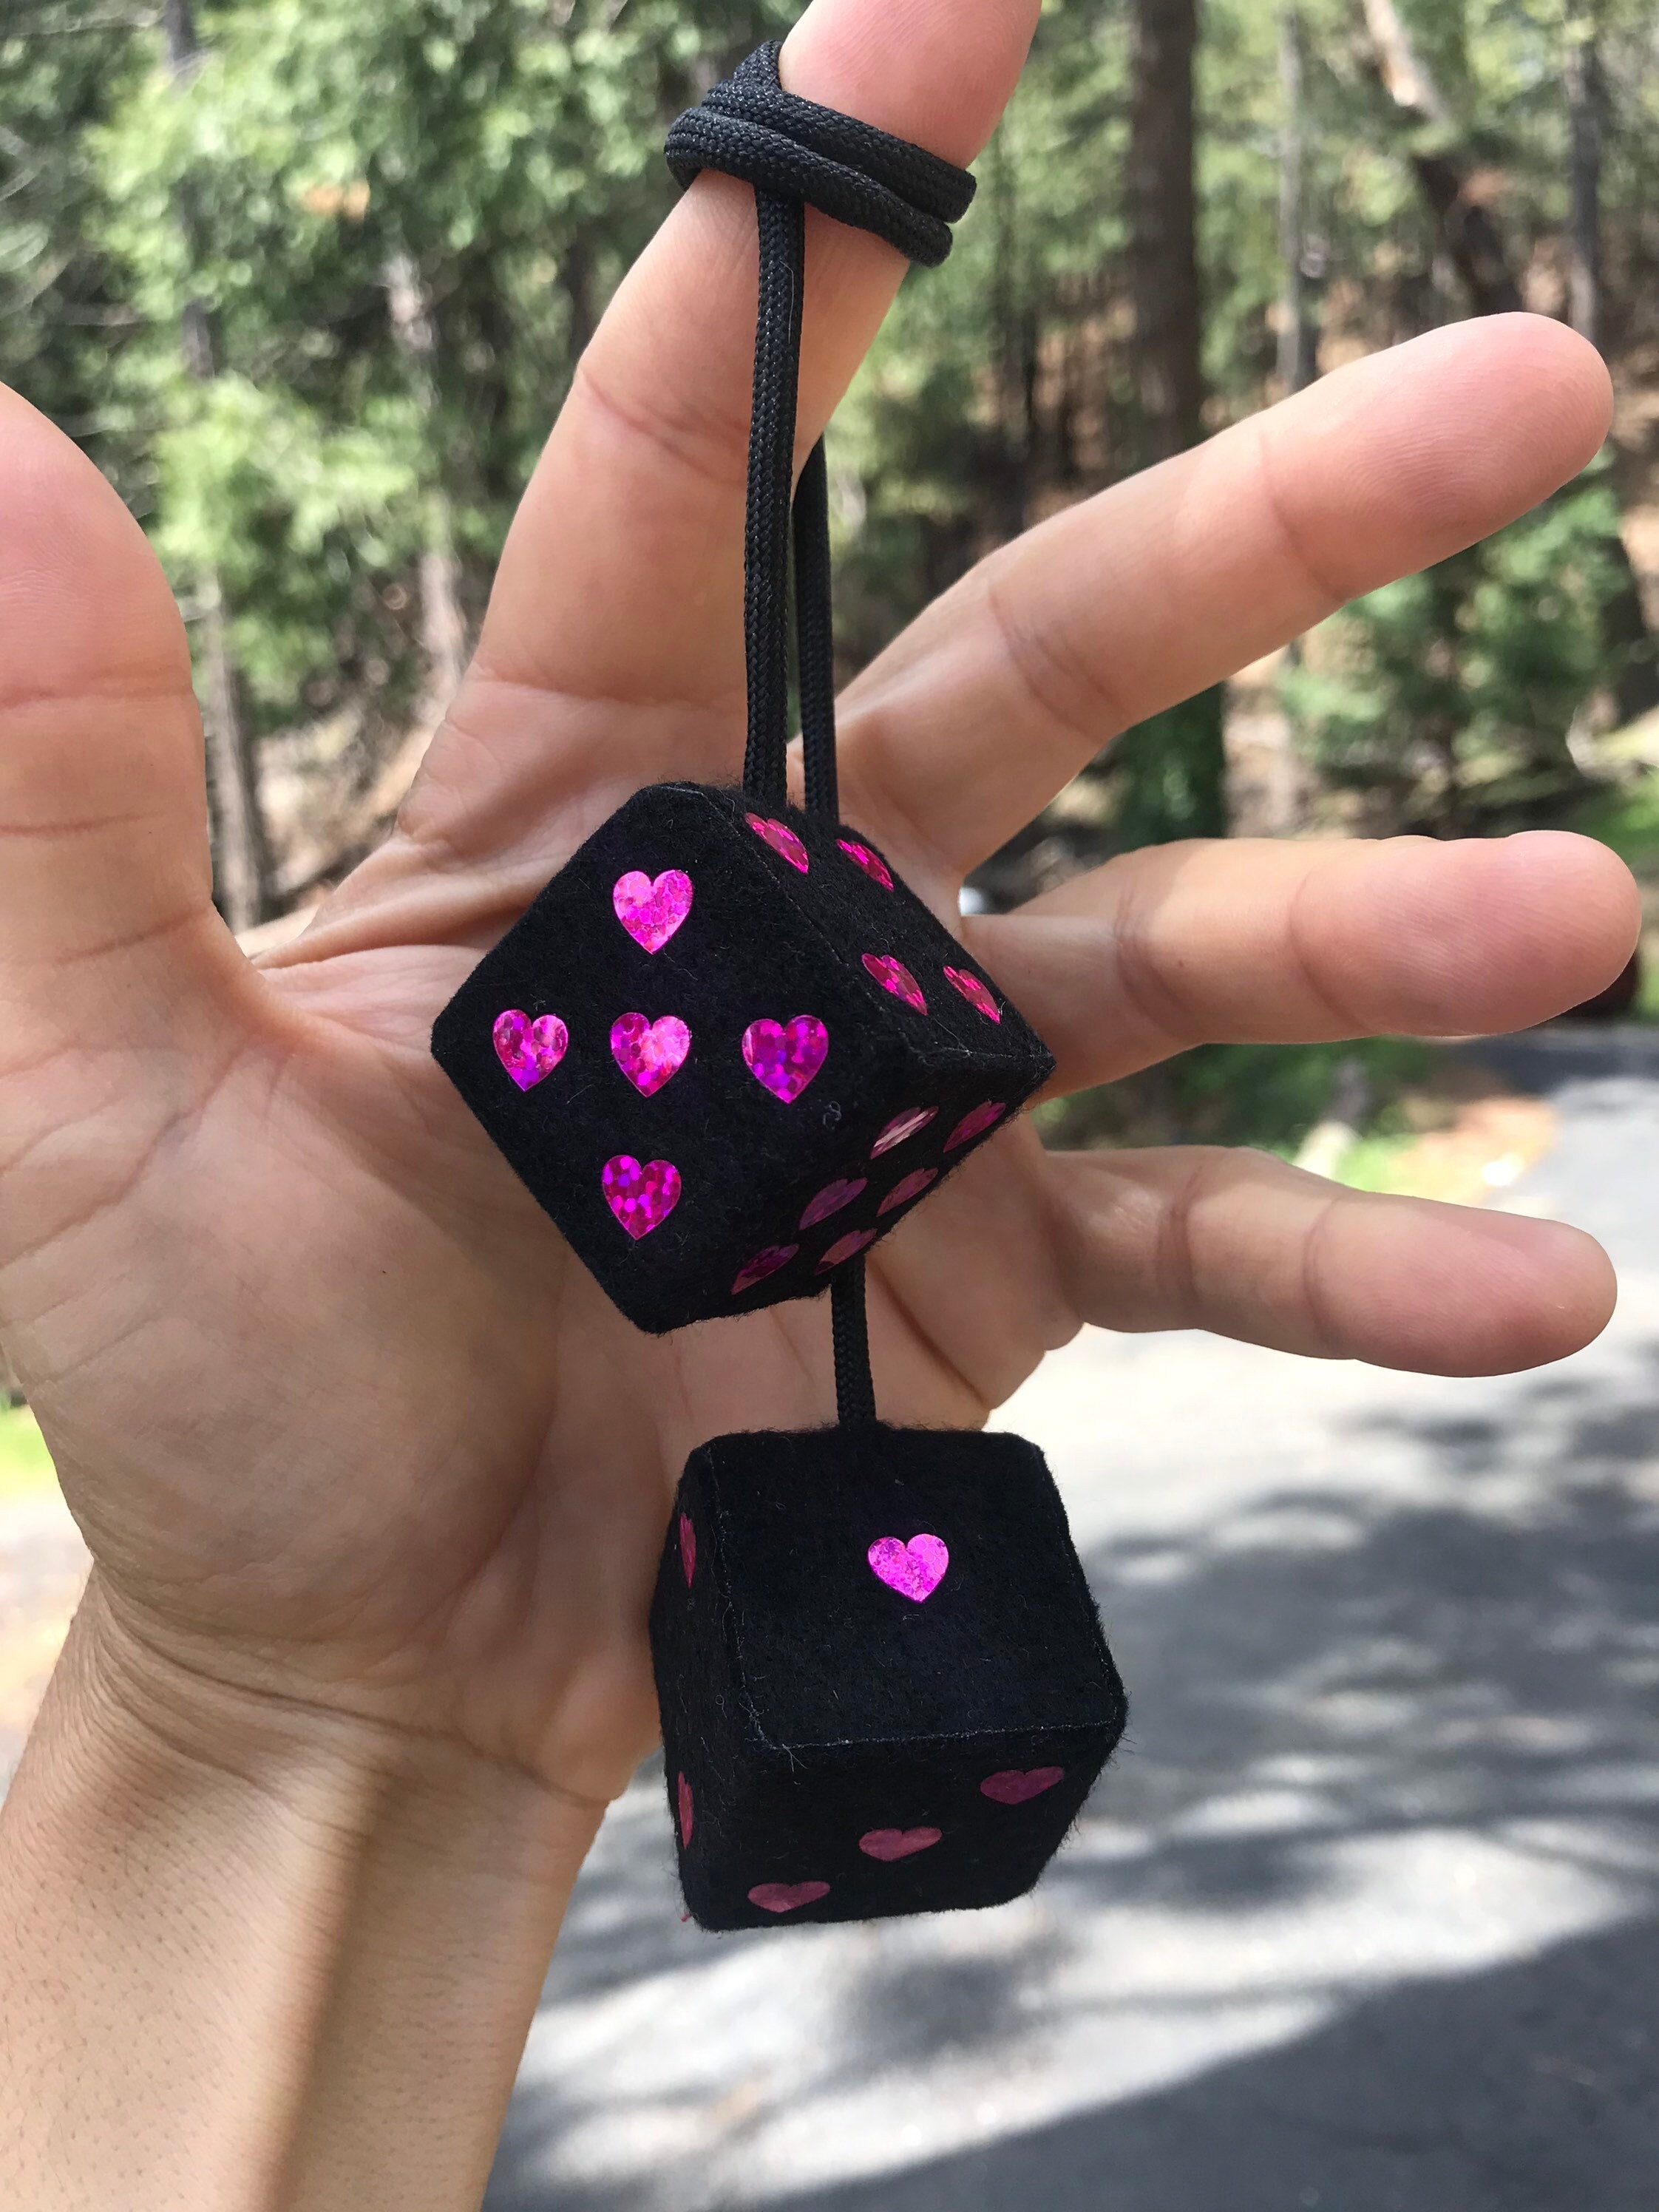 Baby Pink Fuzzy Dice With Black Hearts and Chain or Cord / Car